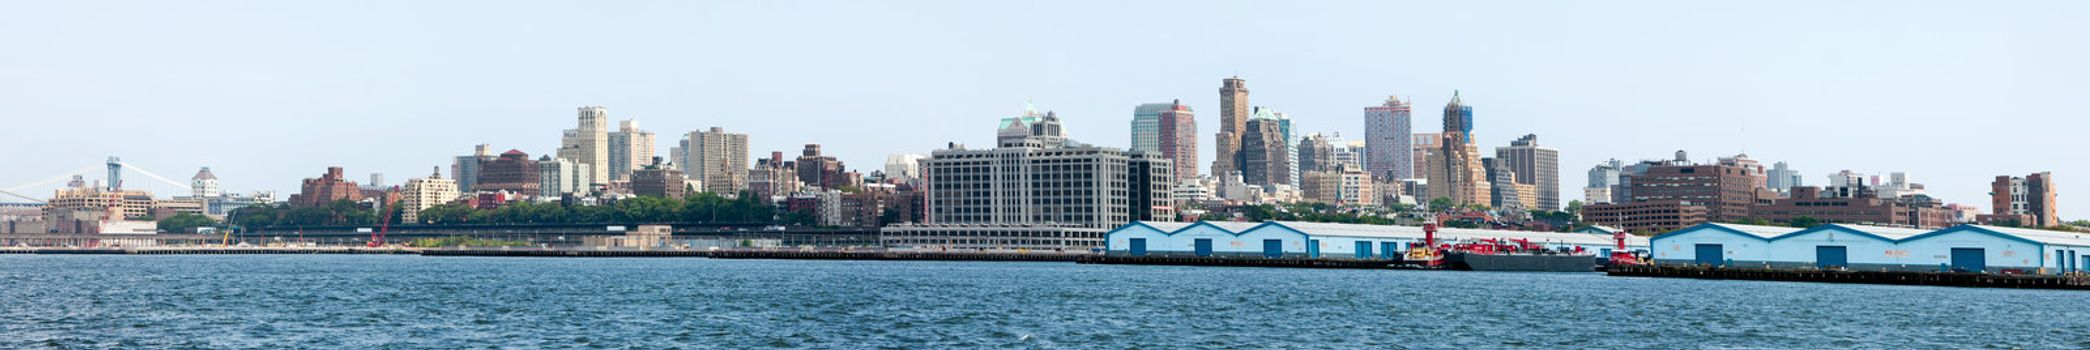 Panoramic view of the landmark skyline of Brooklyn in New York City, showing many apartment and residential buildings including pier and docks used for commercial trade and warehouses.